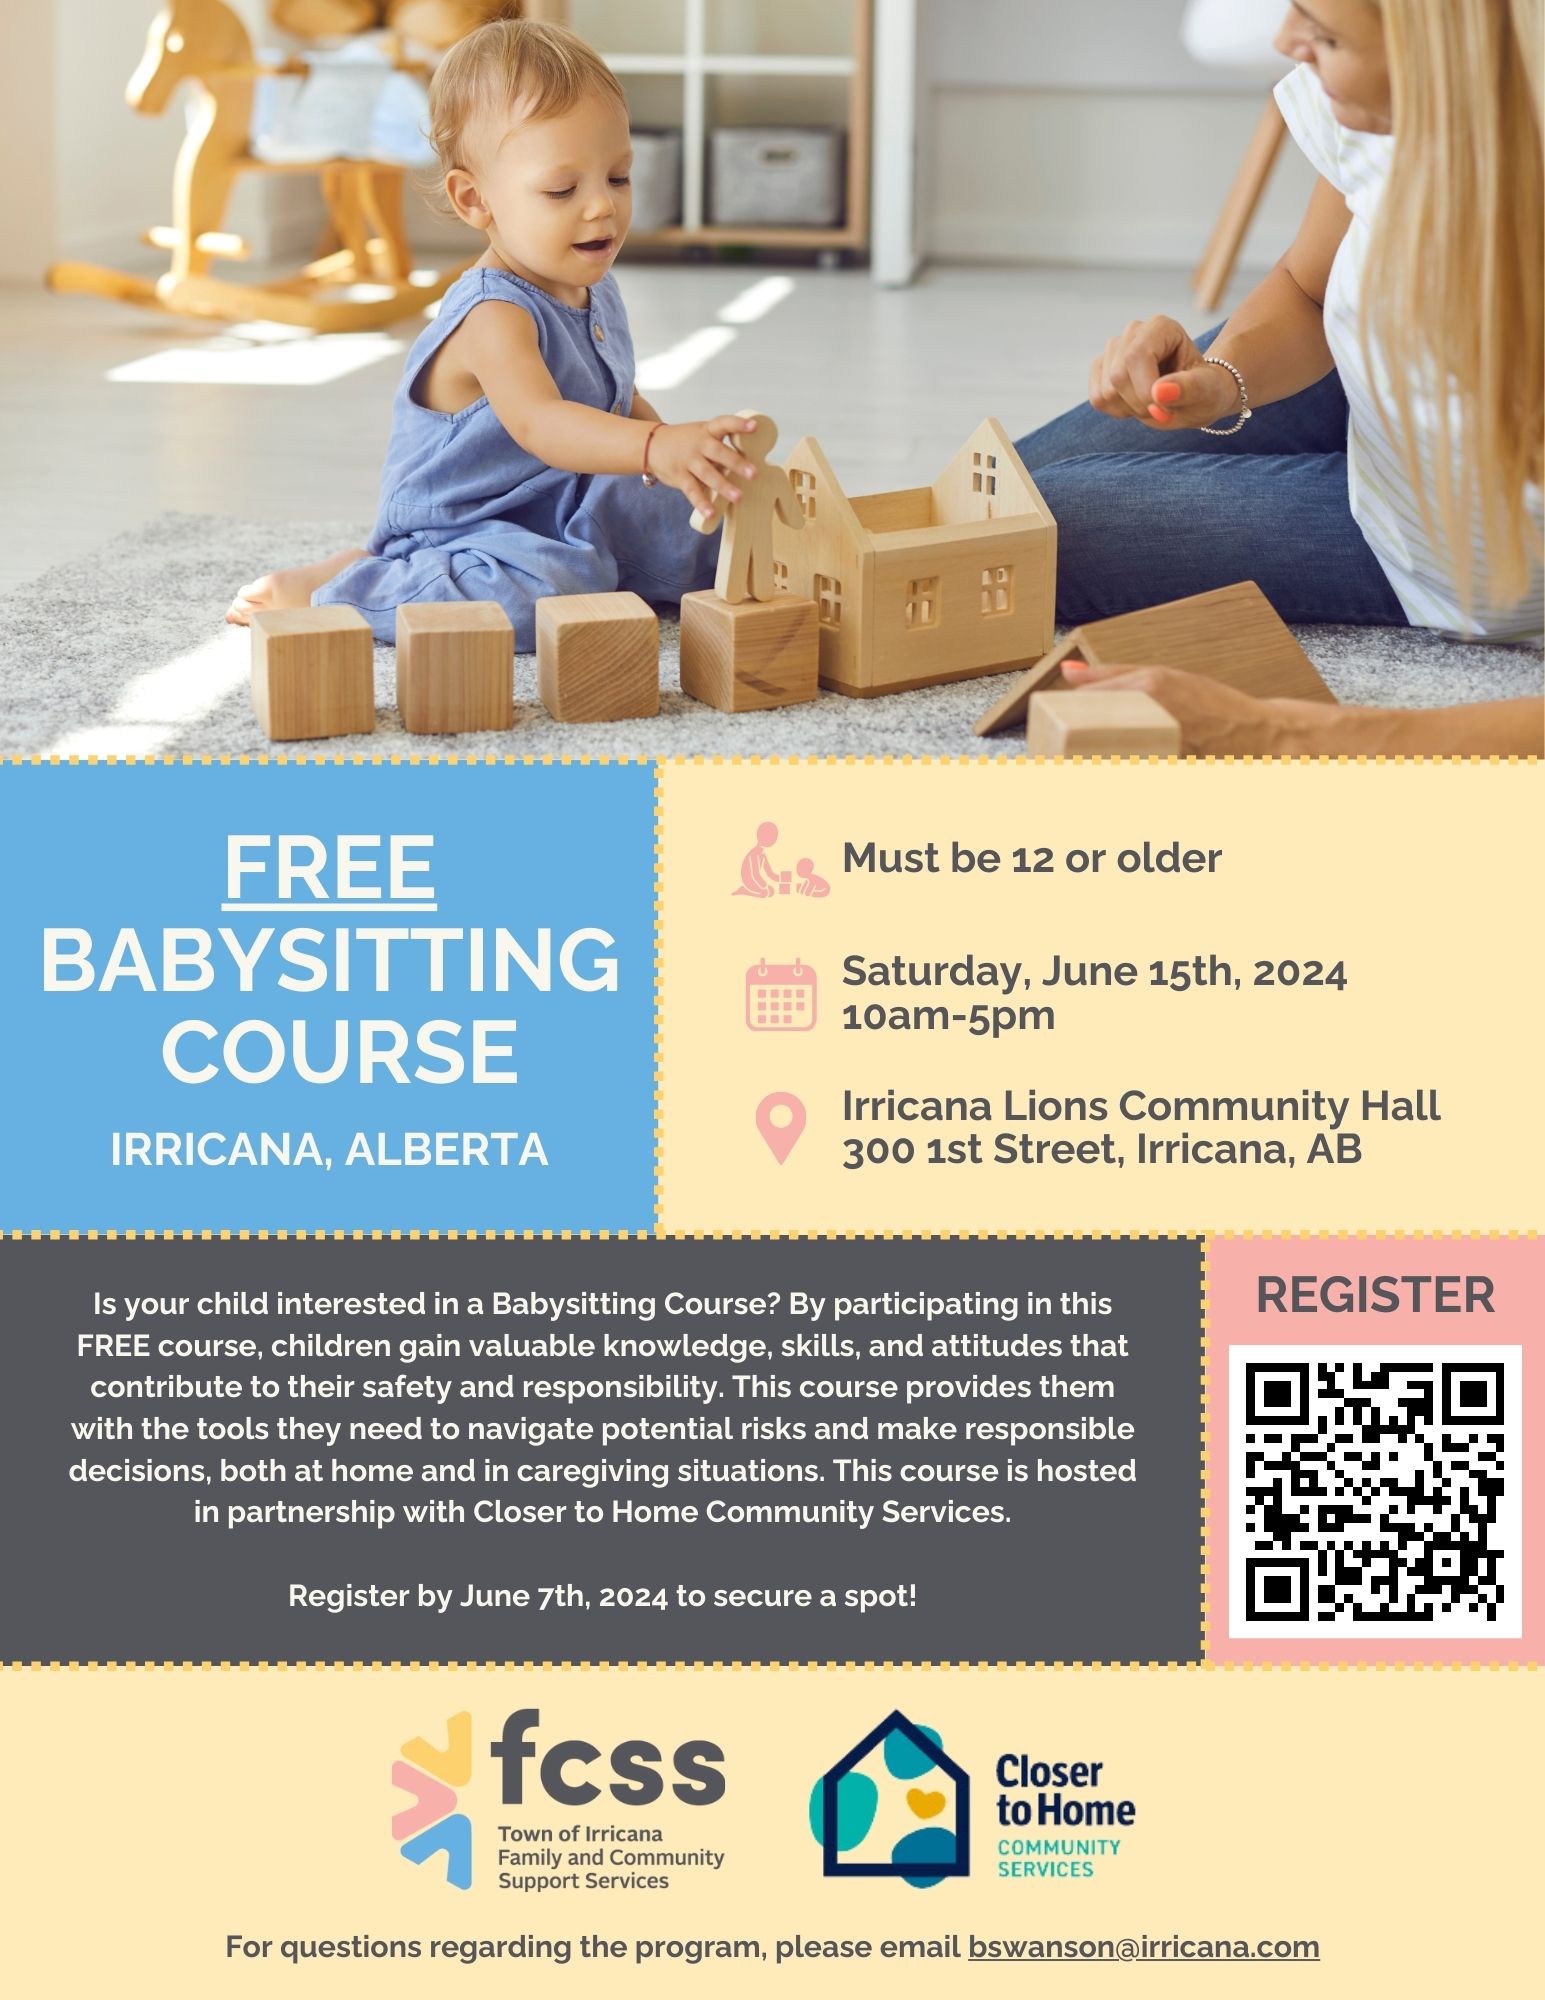 FREE Babysitting Course in the Town of Irricana hosted by Closer to Home Community Services on Saturday, June 15, 2024